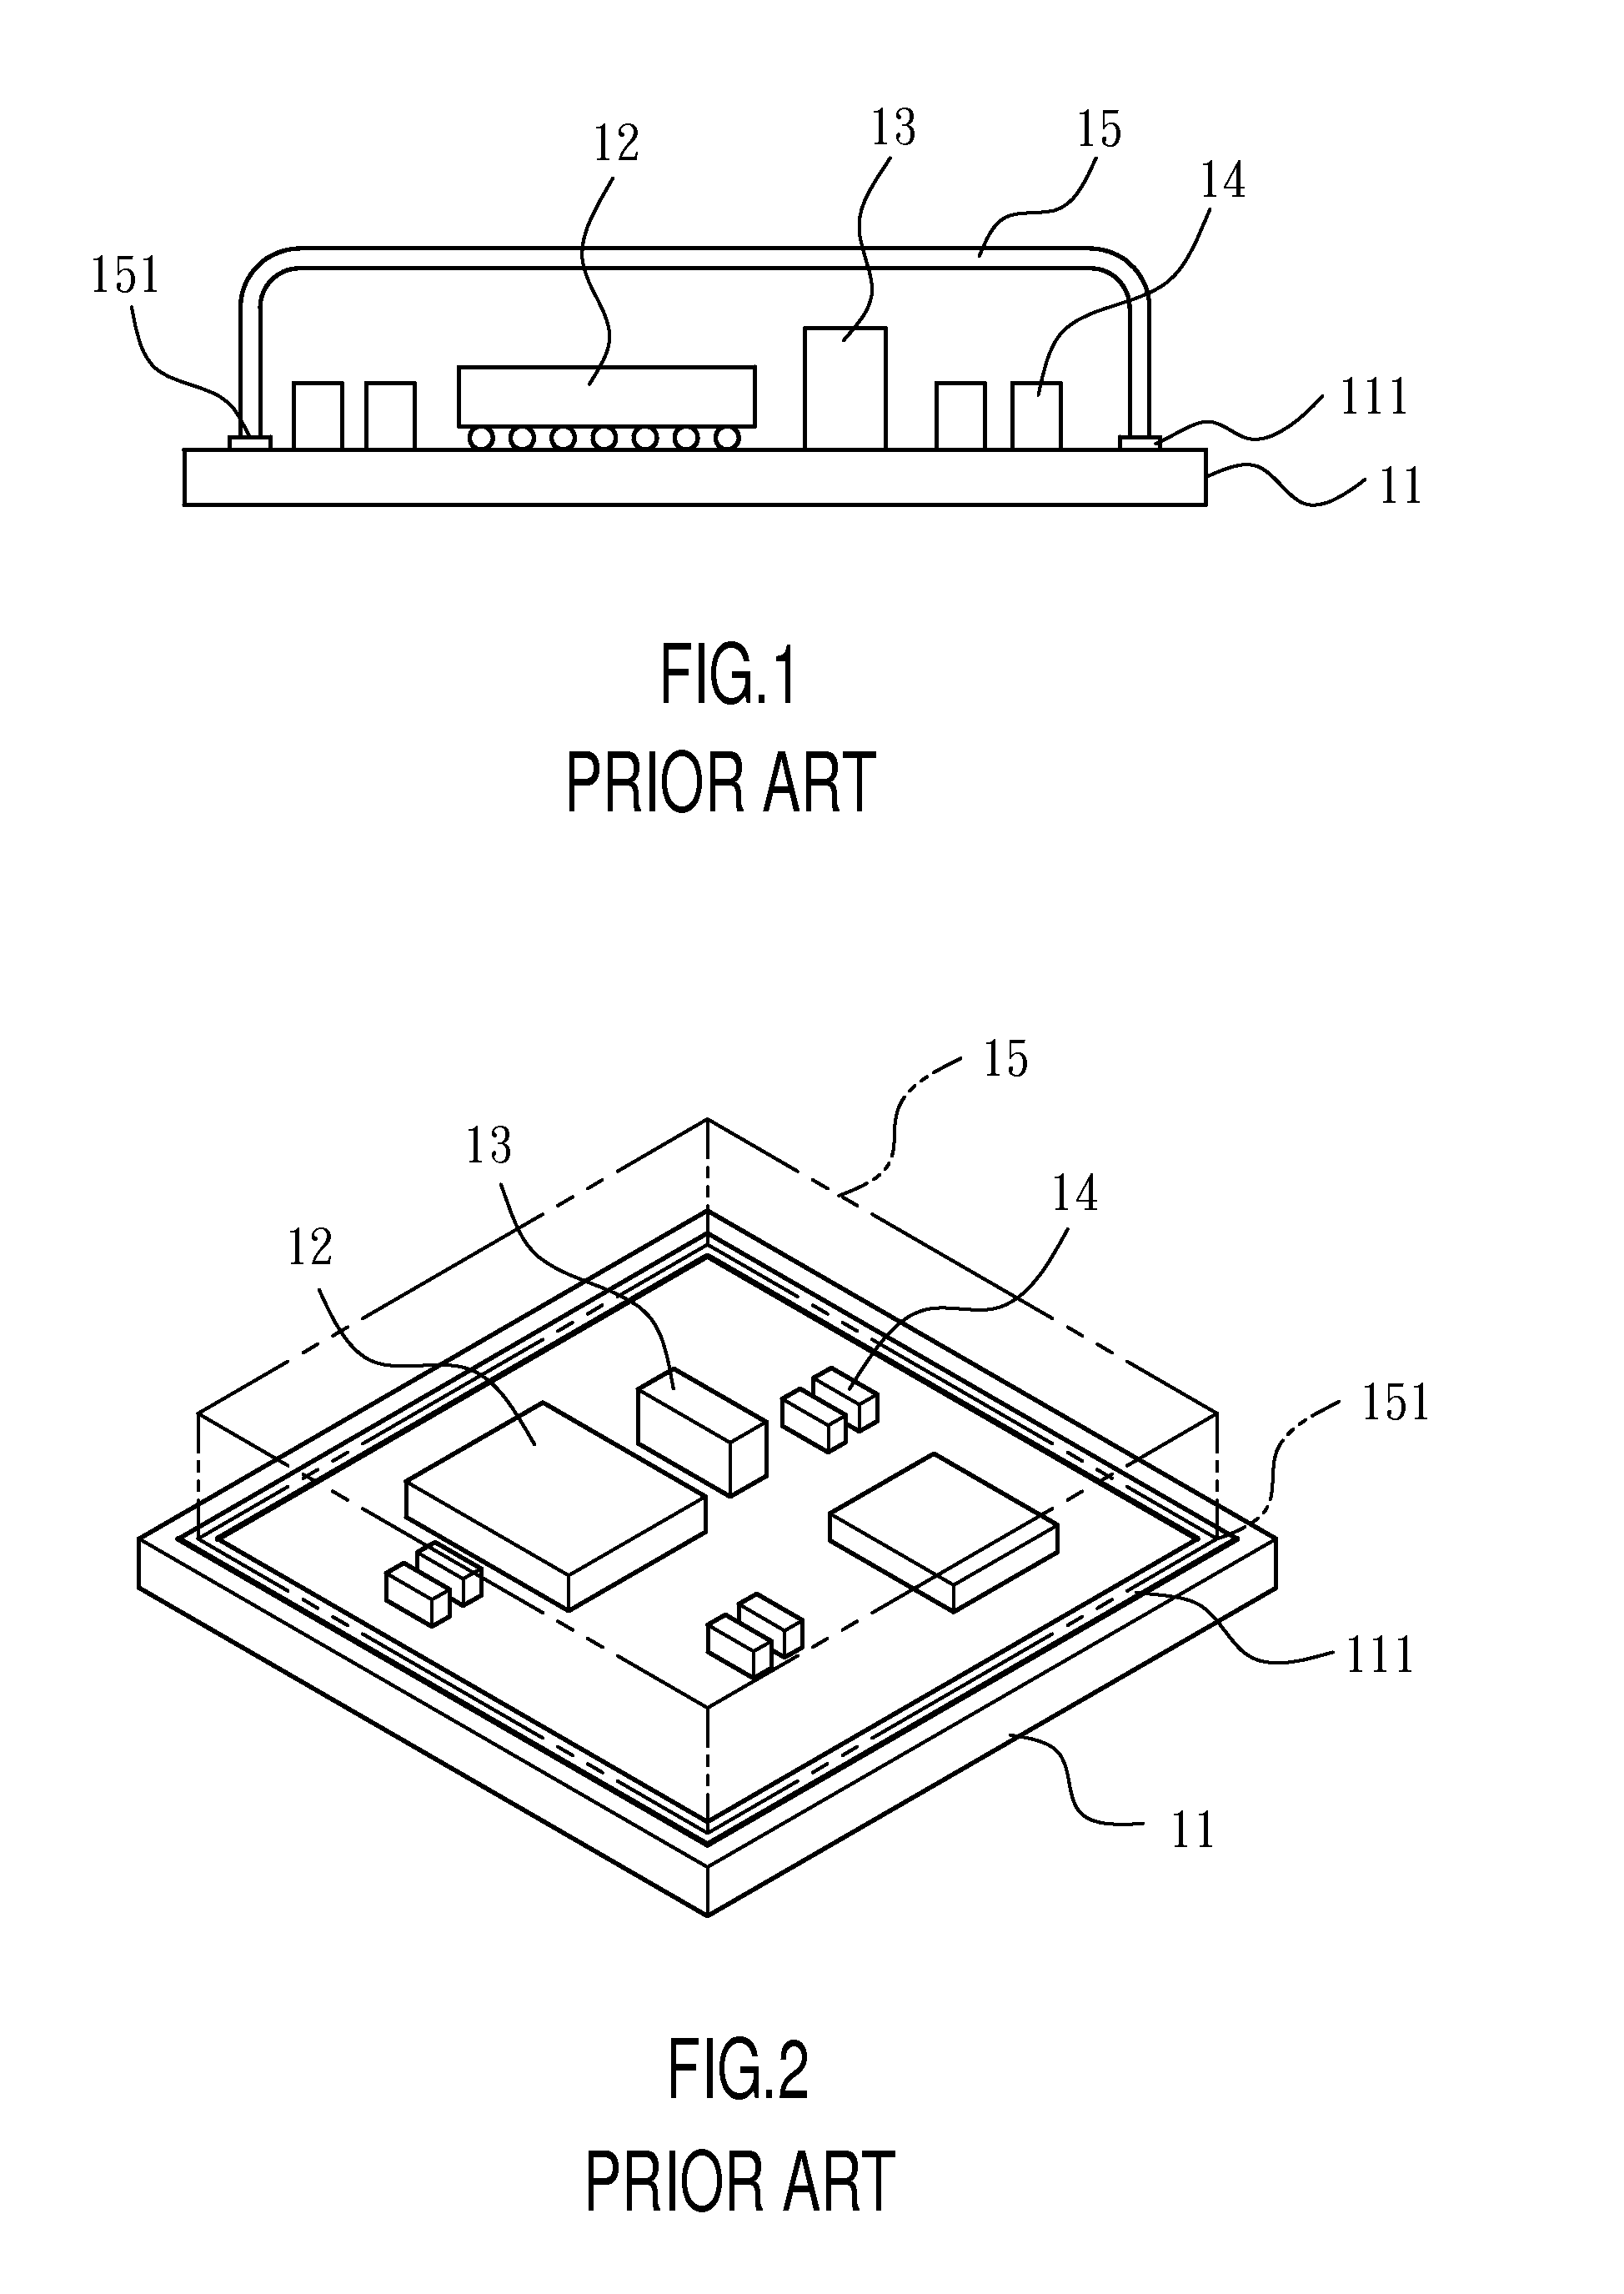 Package structure for wireless communication module